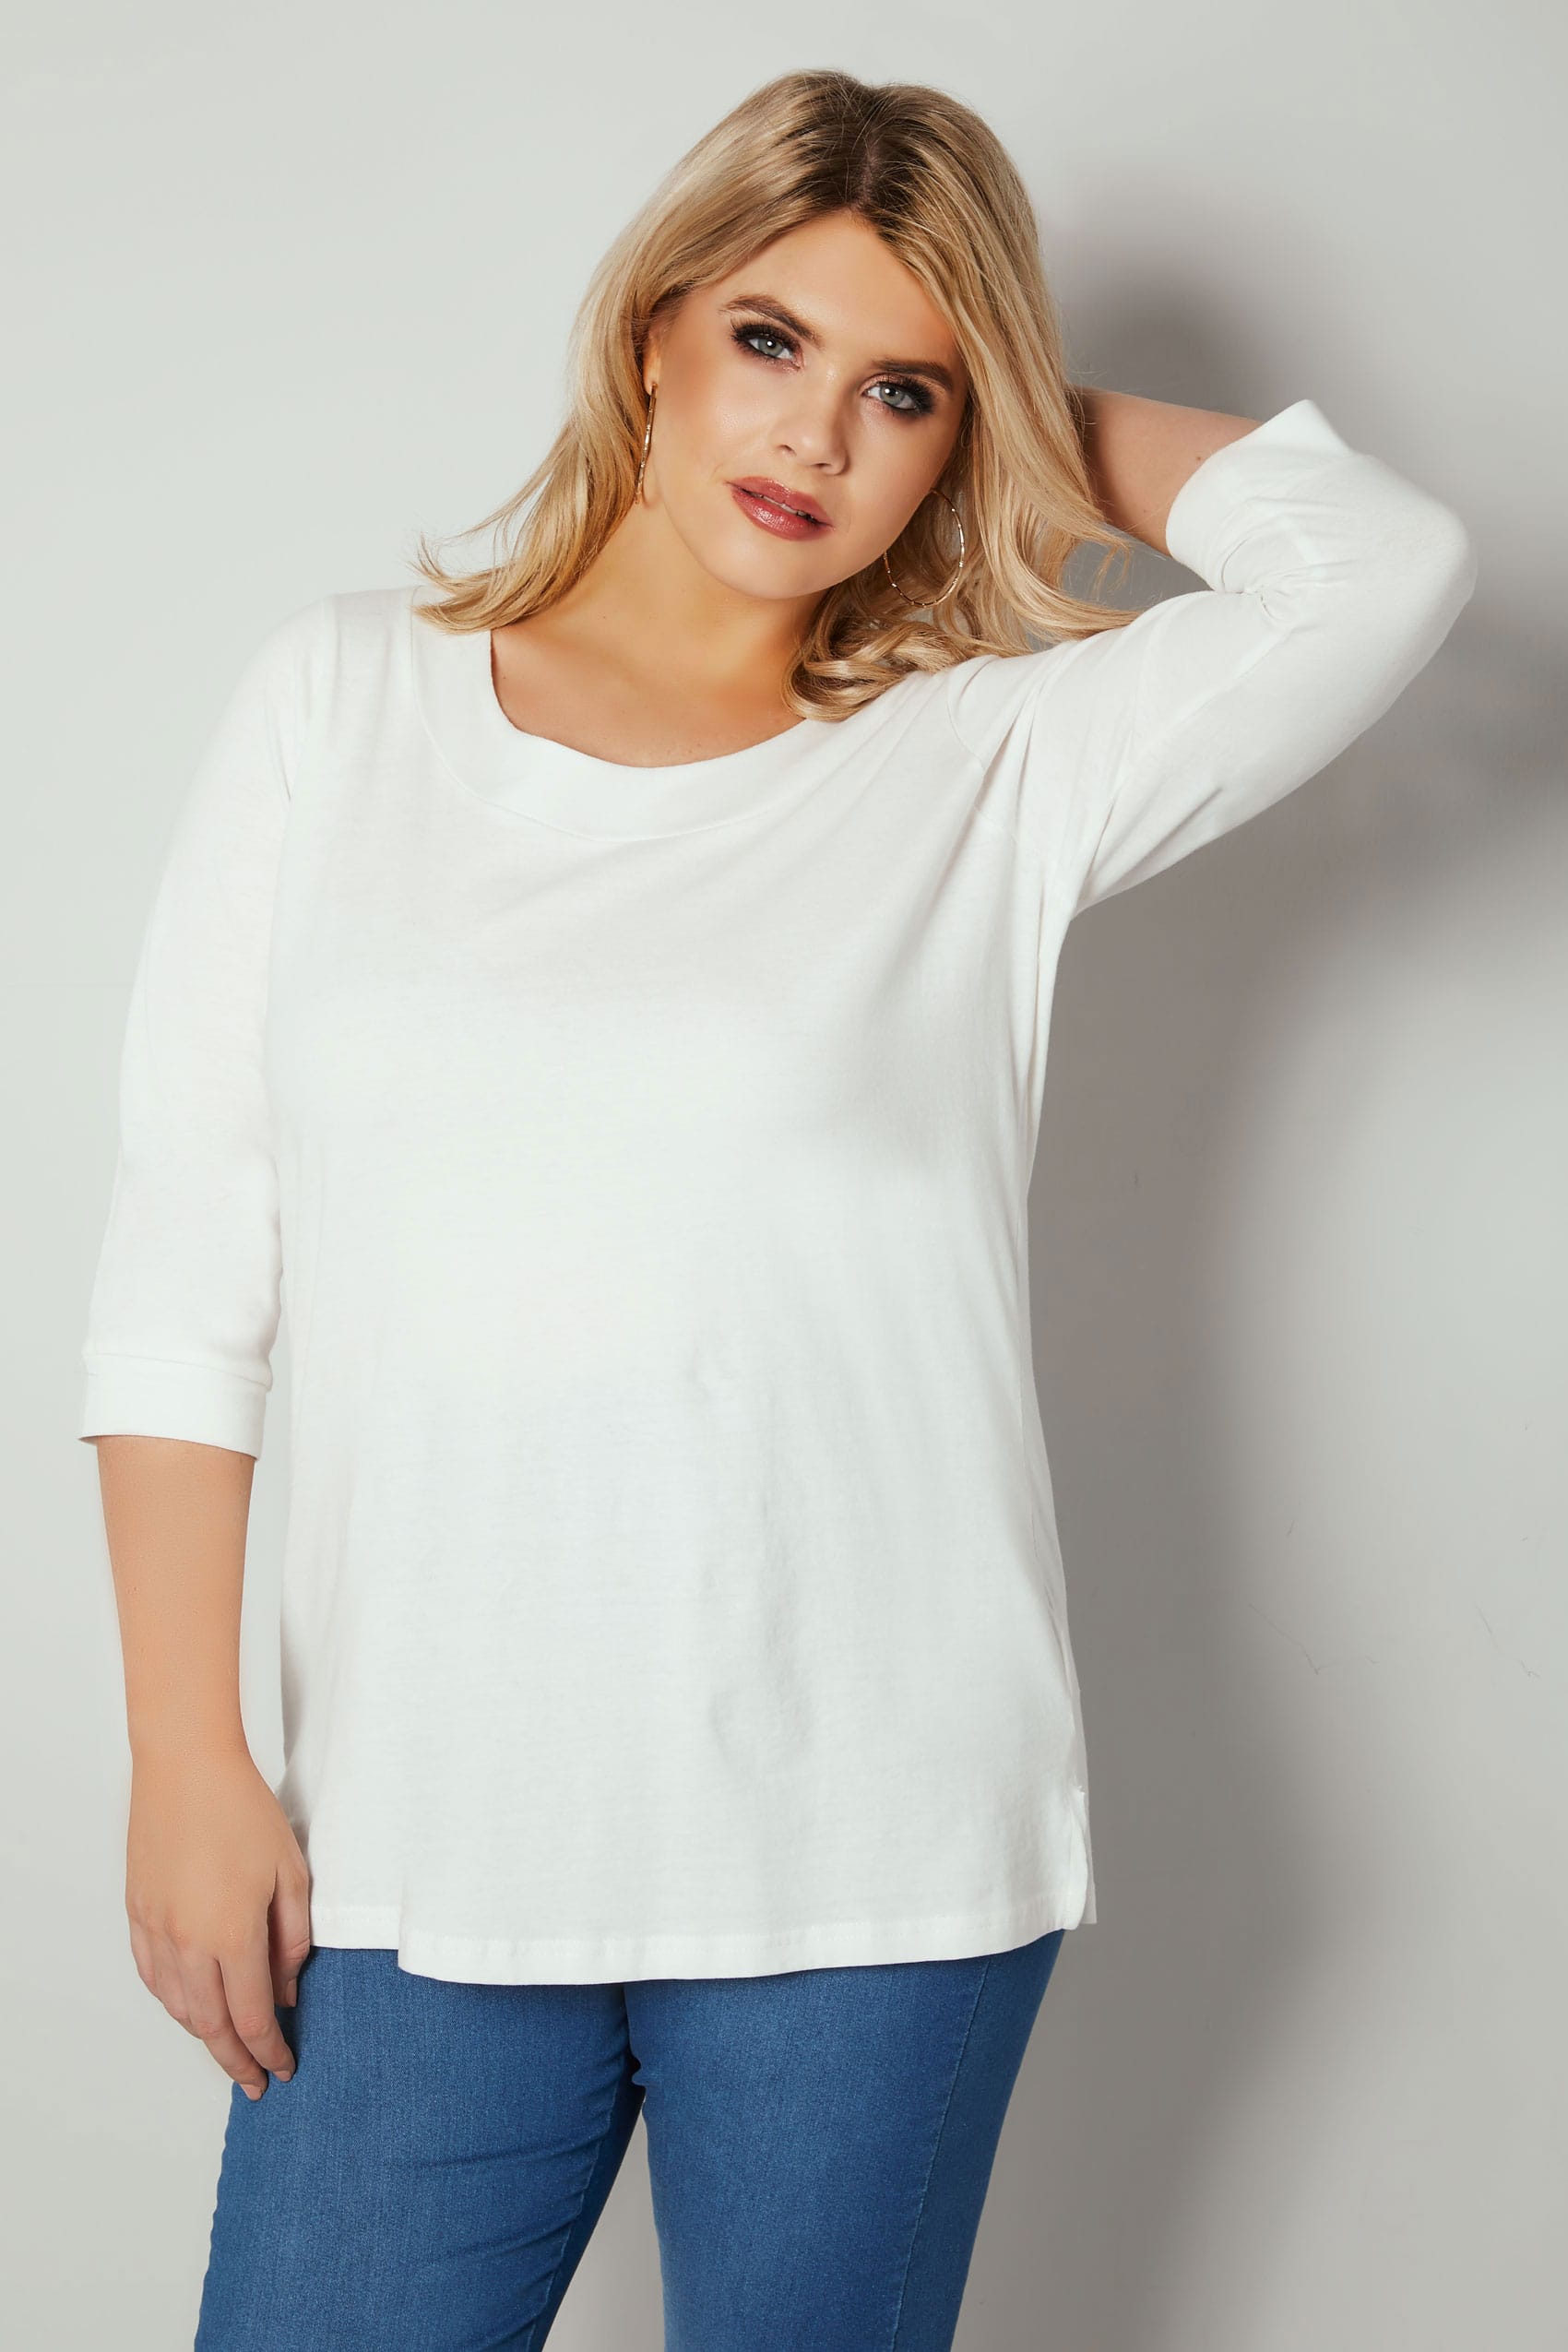 Ivory Band Scoop Neckline T-Shirt With 3/4 Sleeves, Plus size 16 to 36 ...